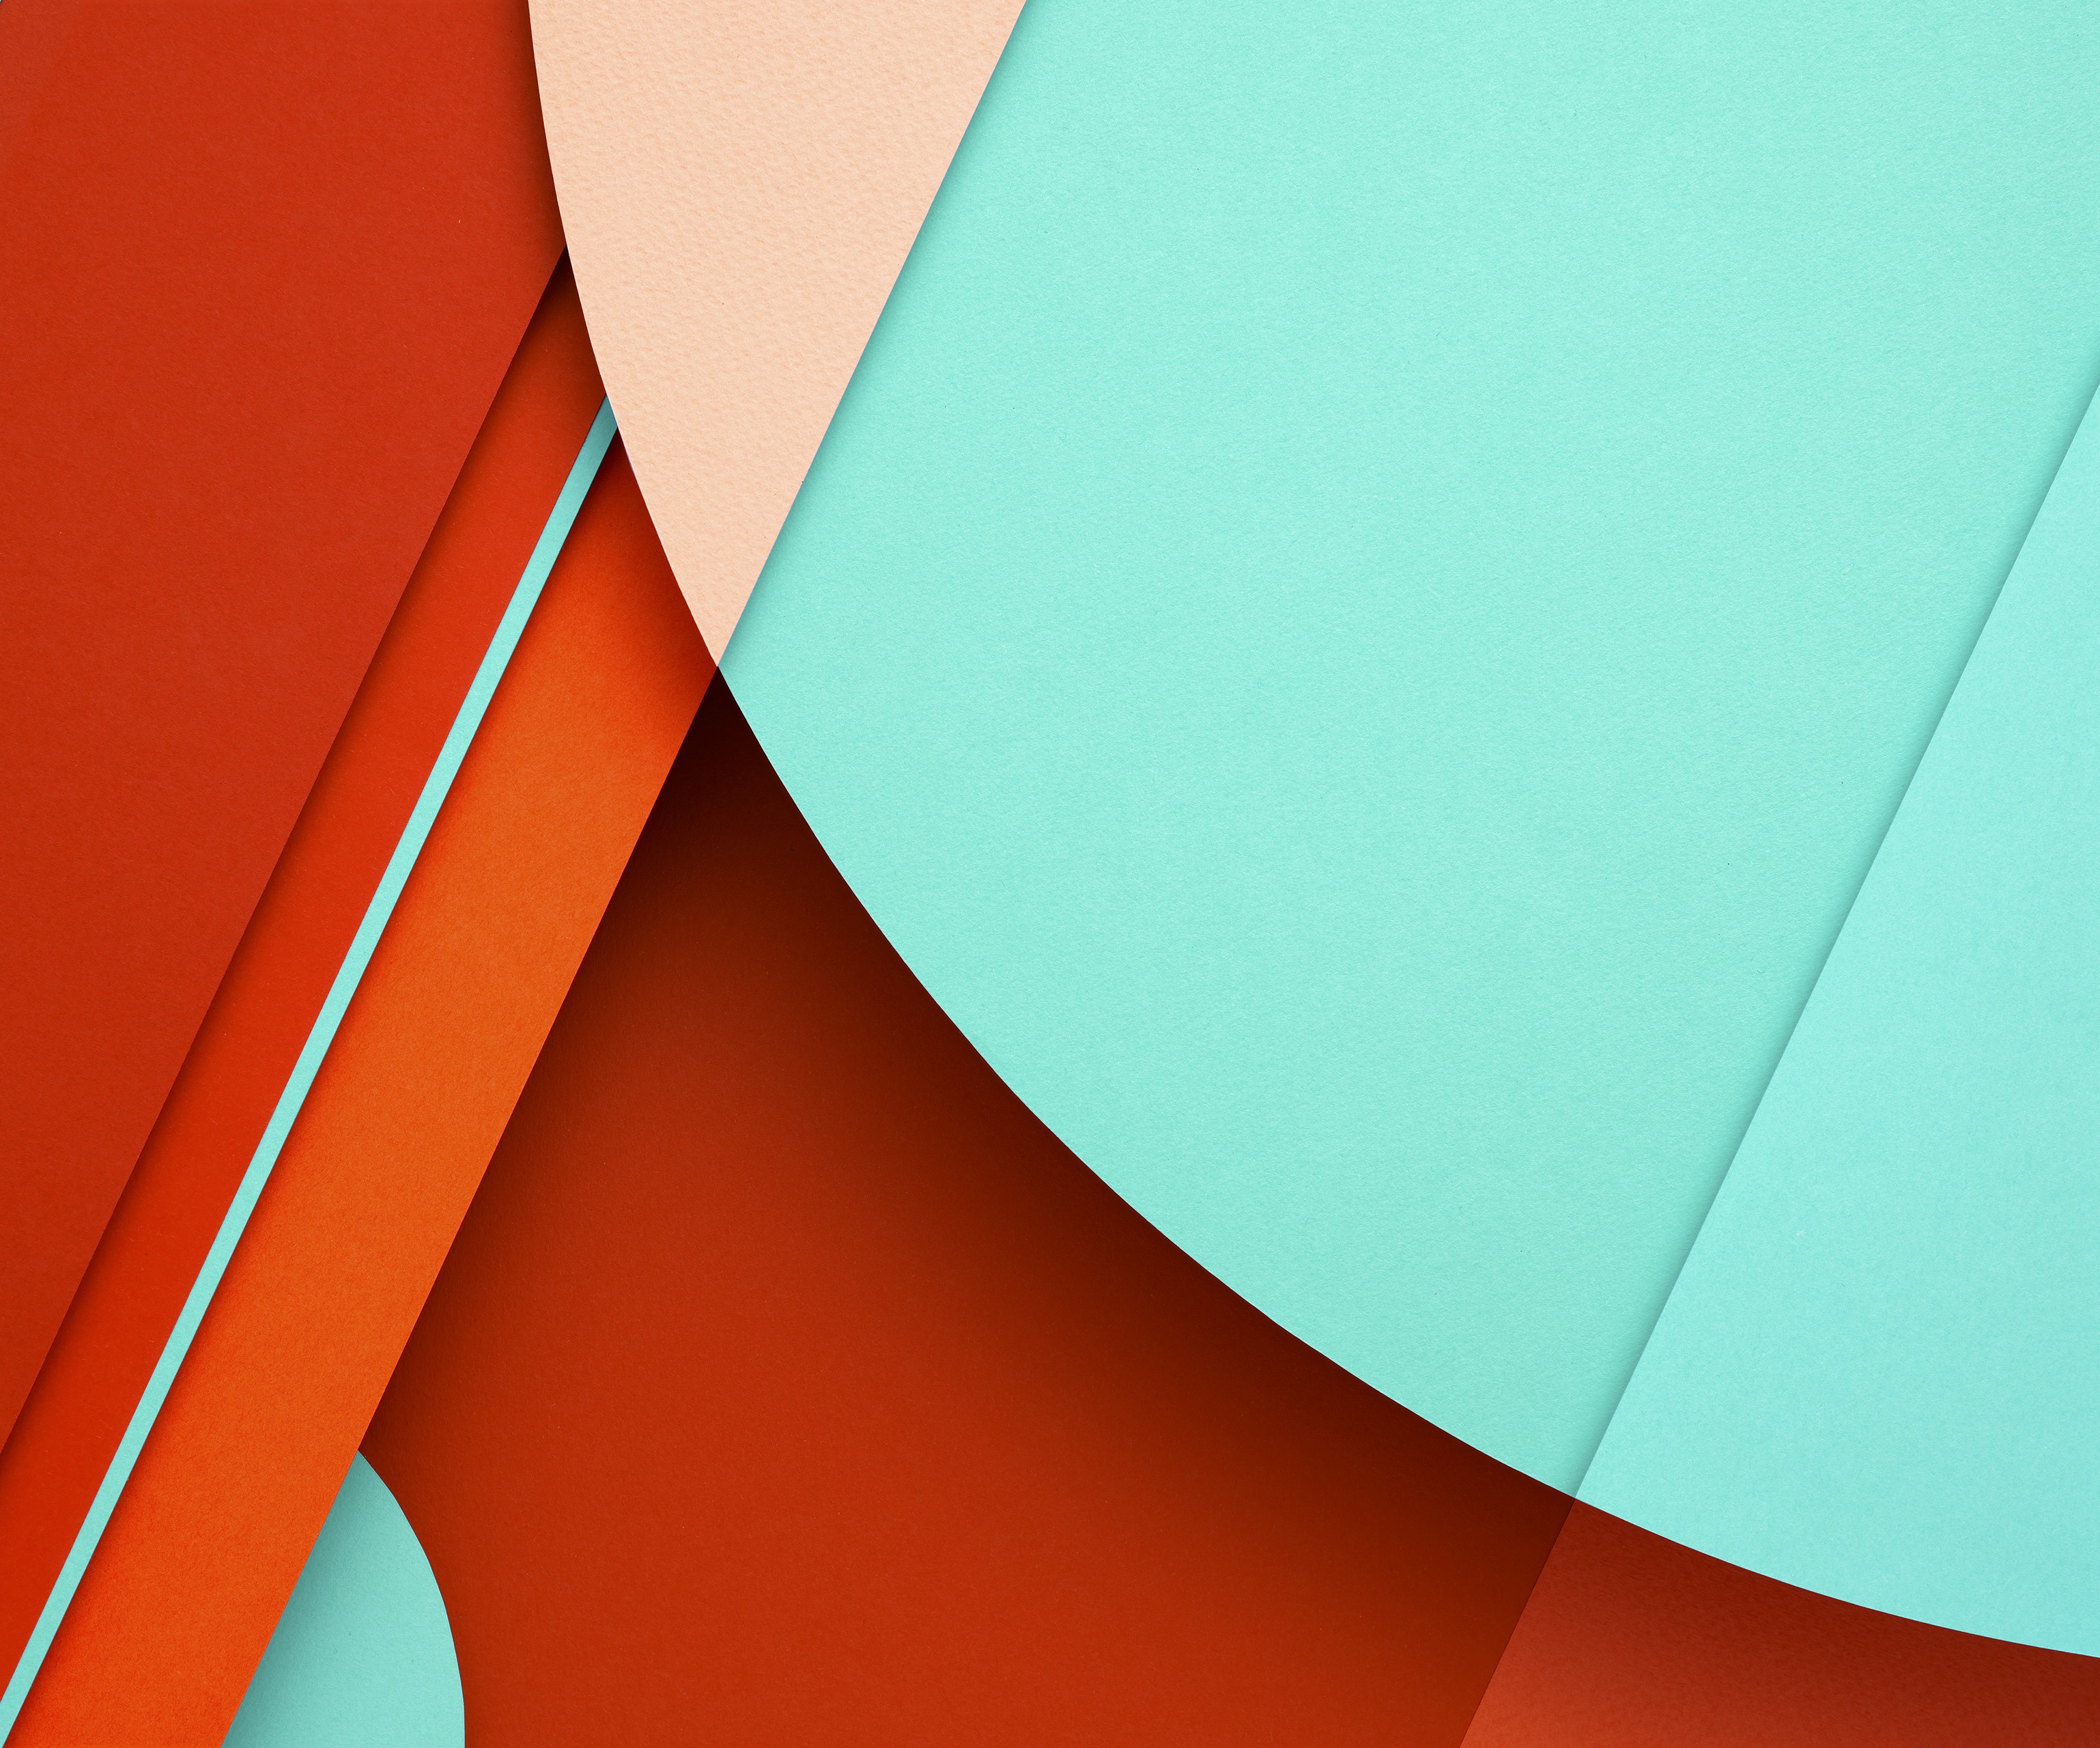 New Android Lollipop Wallpaper For You Adorn Your Devices With